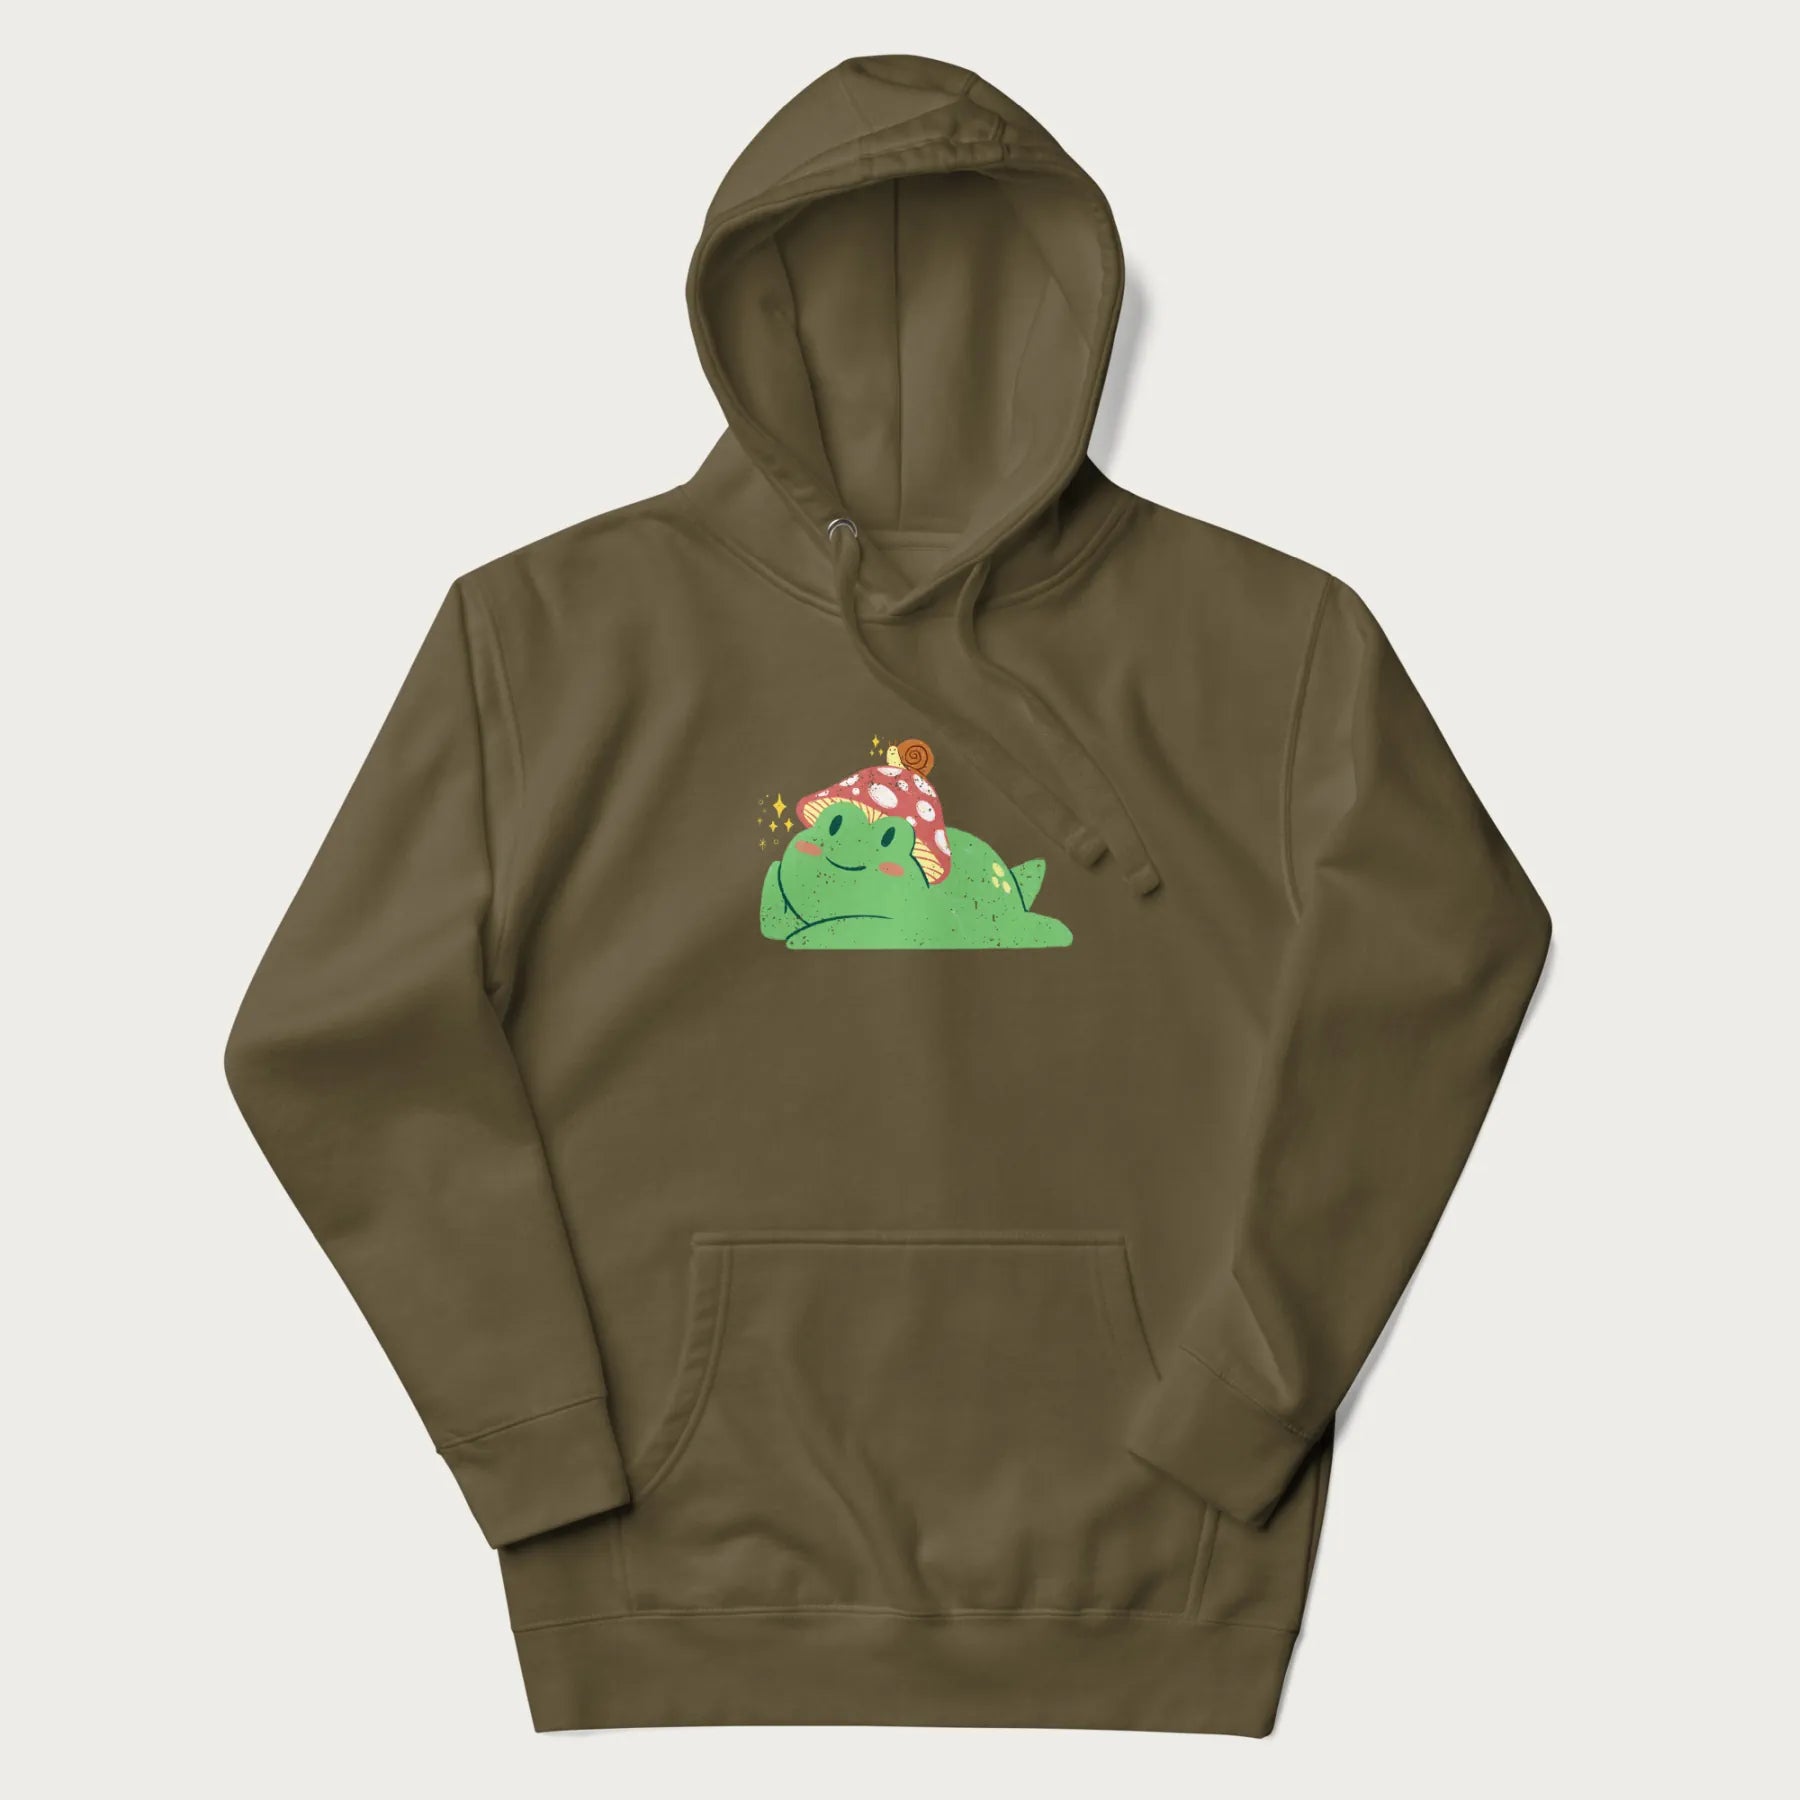 Military green hoodie with a cottagecore design of a green frog wearing a mushroom cap and a snail on top.